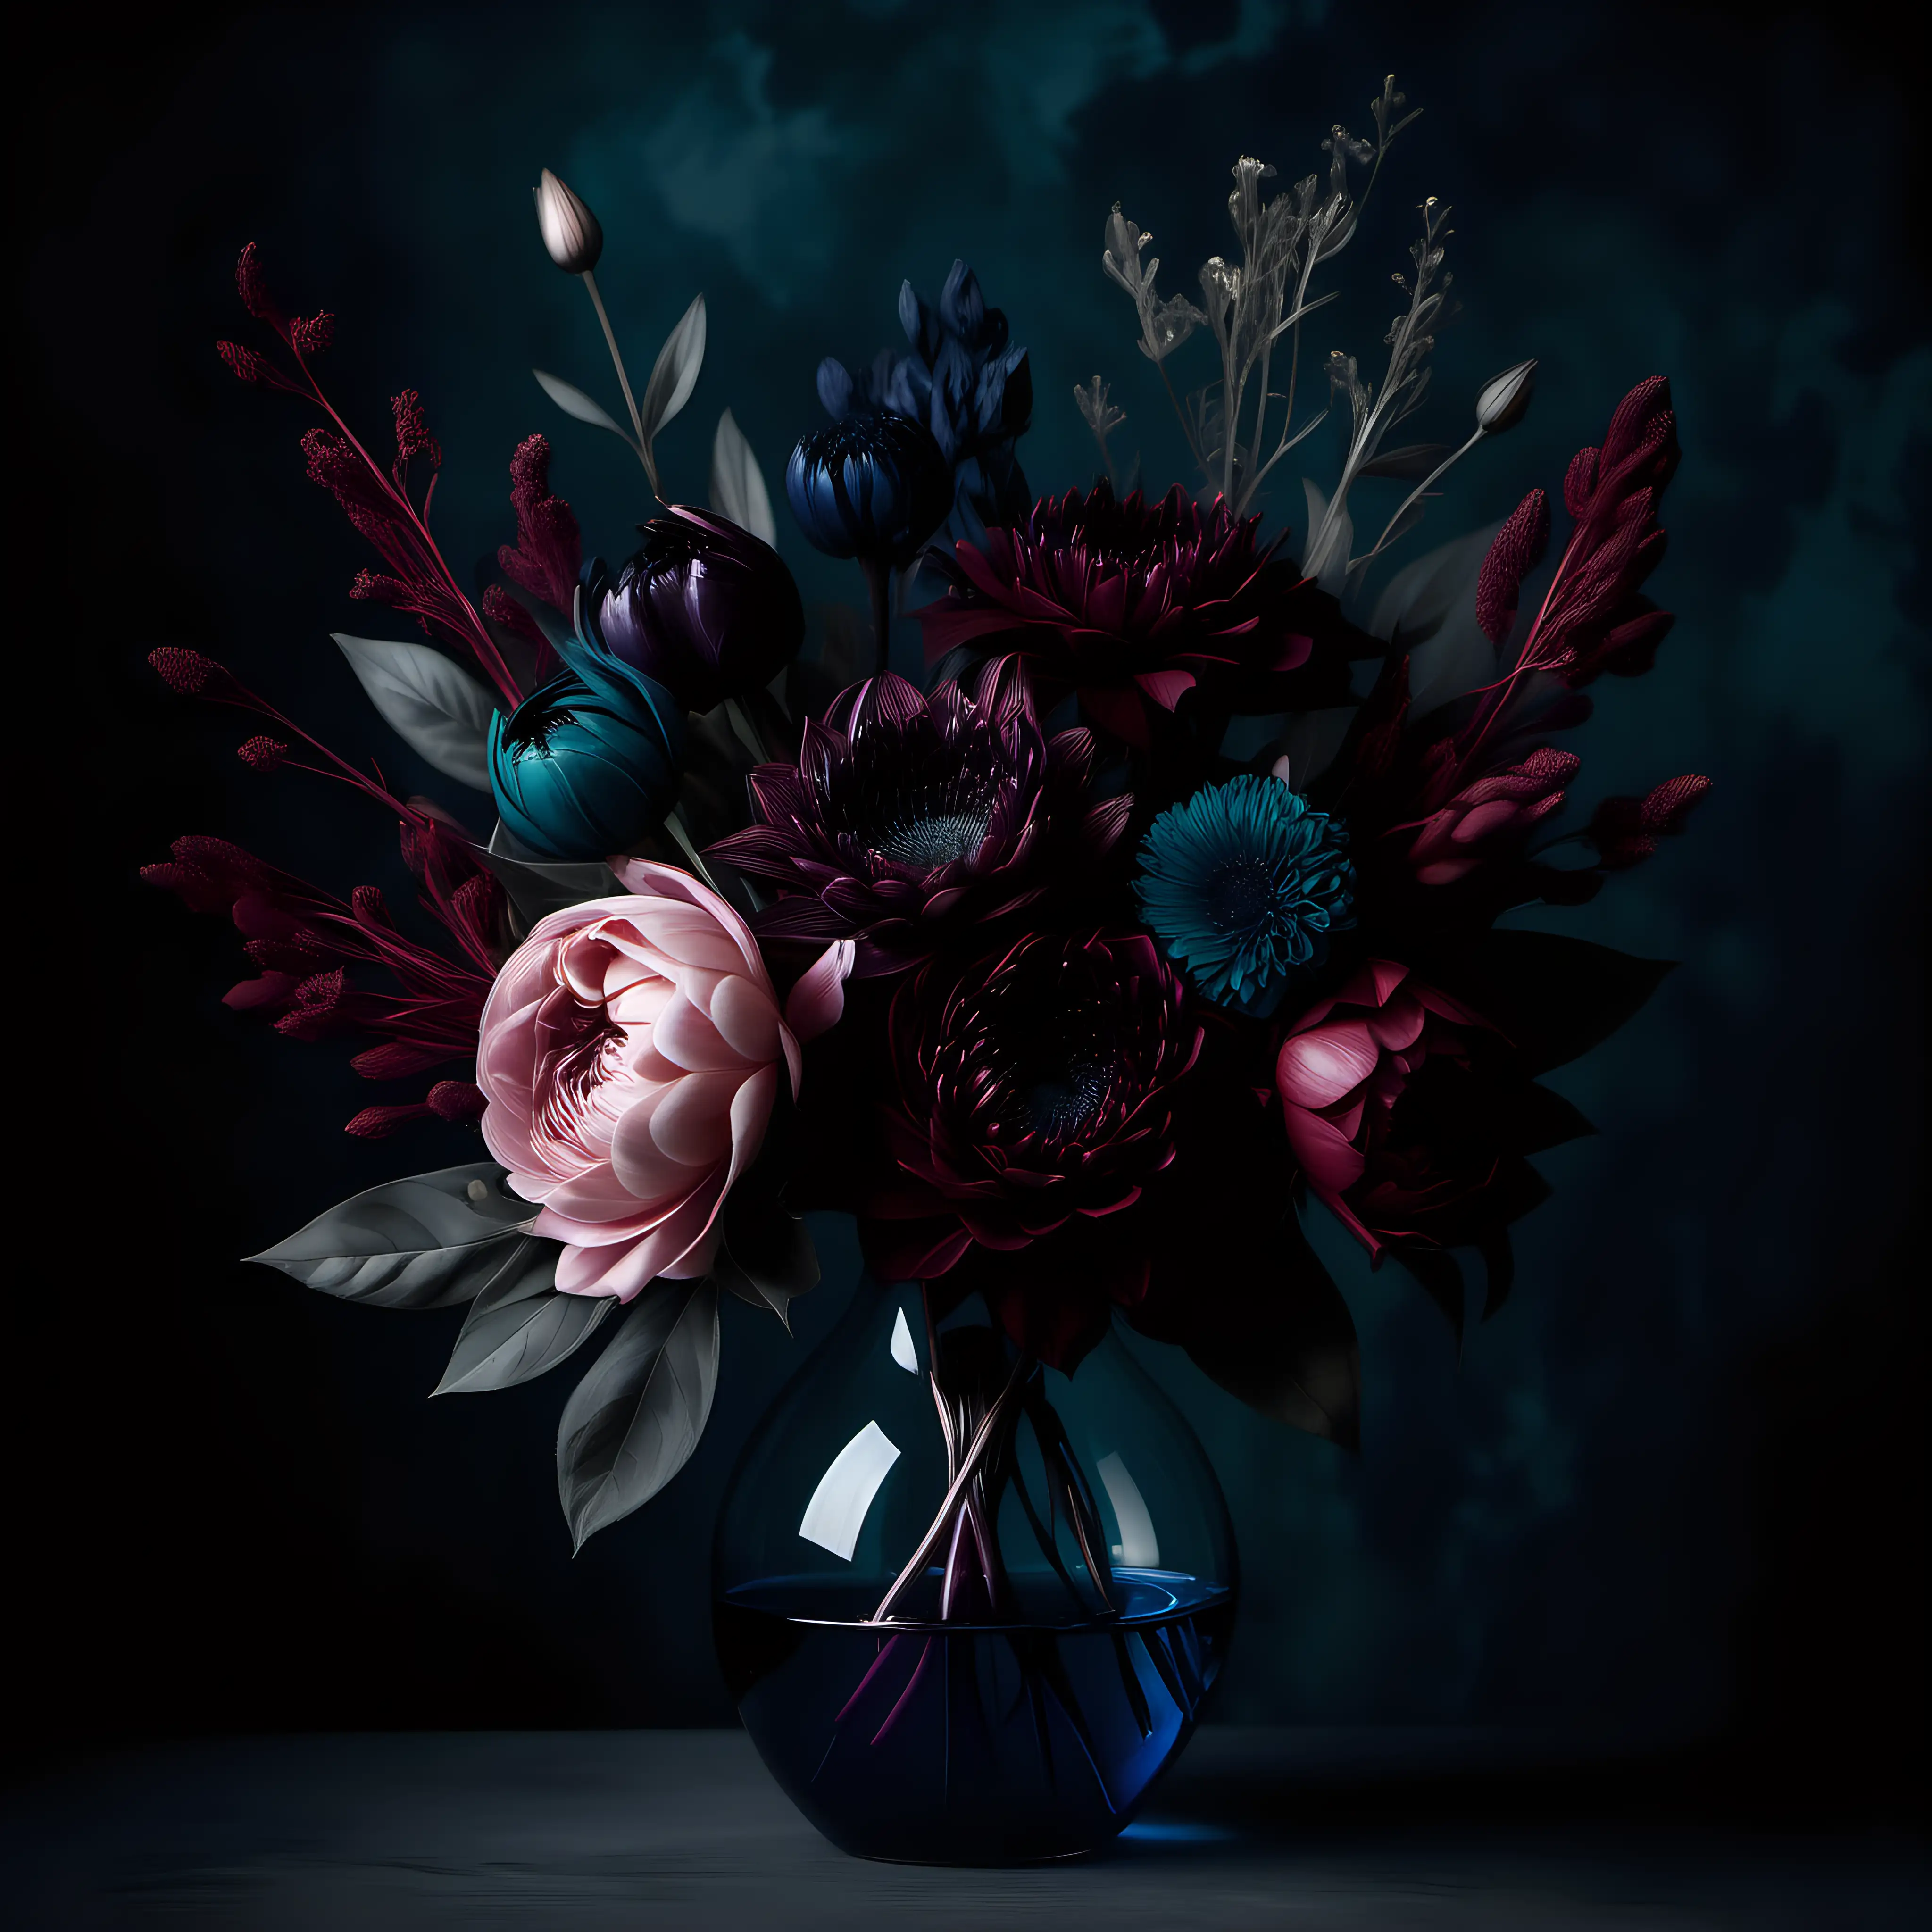 dark floral bouquet with dark red, dark teal, dark blue, dark pink, dark purple in high quality photo print suitable for wall art. Just the flowers appearing in the picture. No vase.